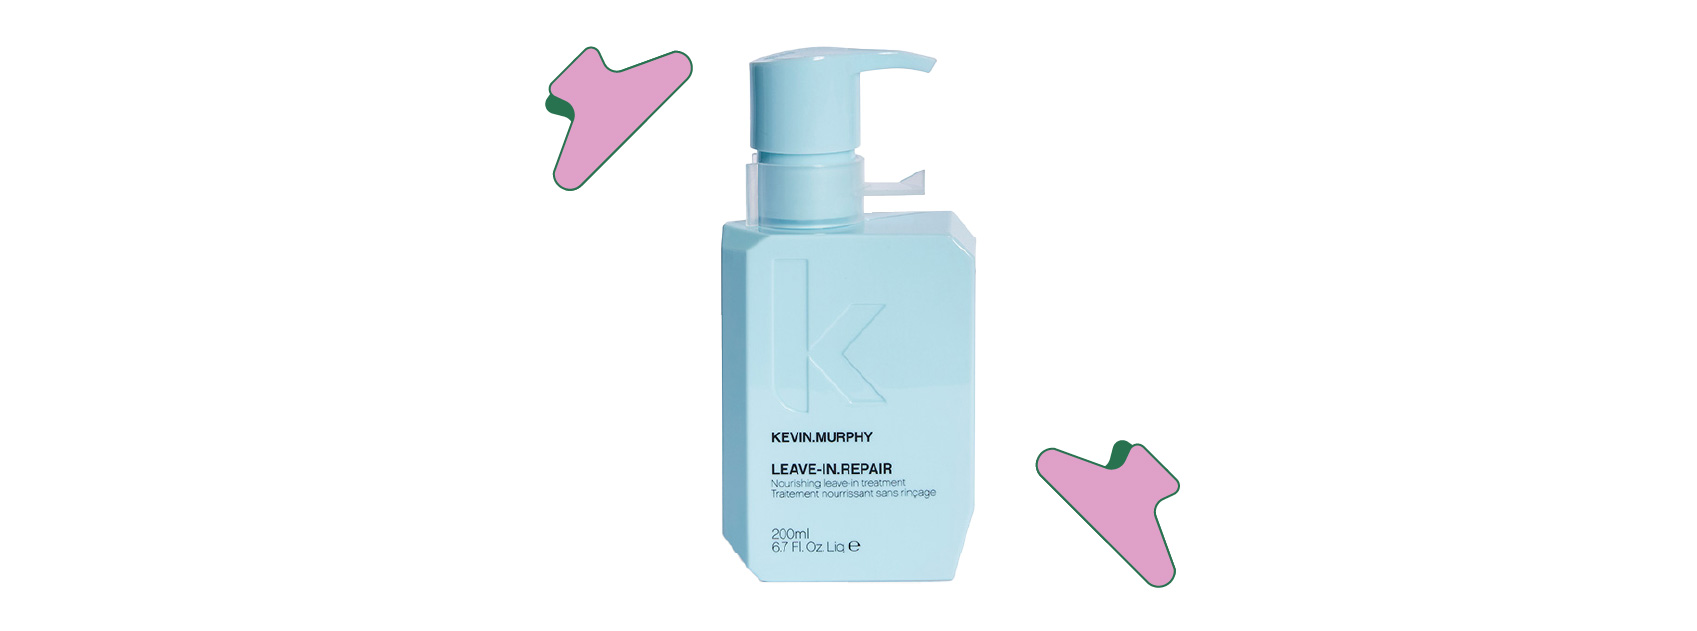 bottle of leave-in repair by kevin murphy with an illustration of hair clips